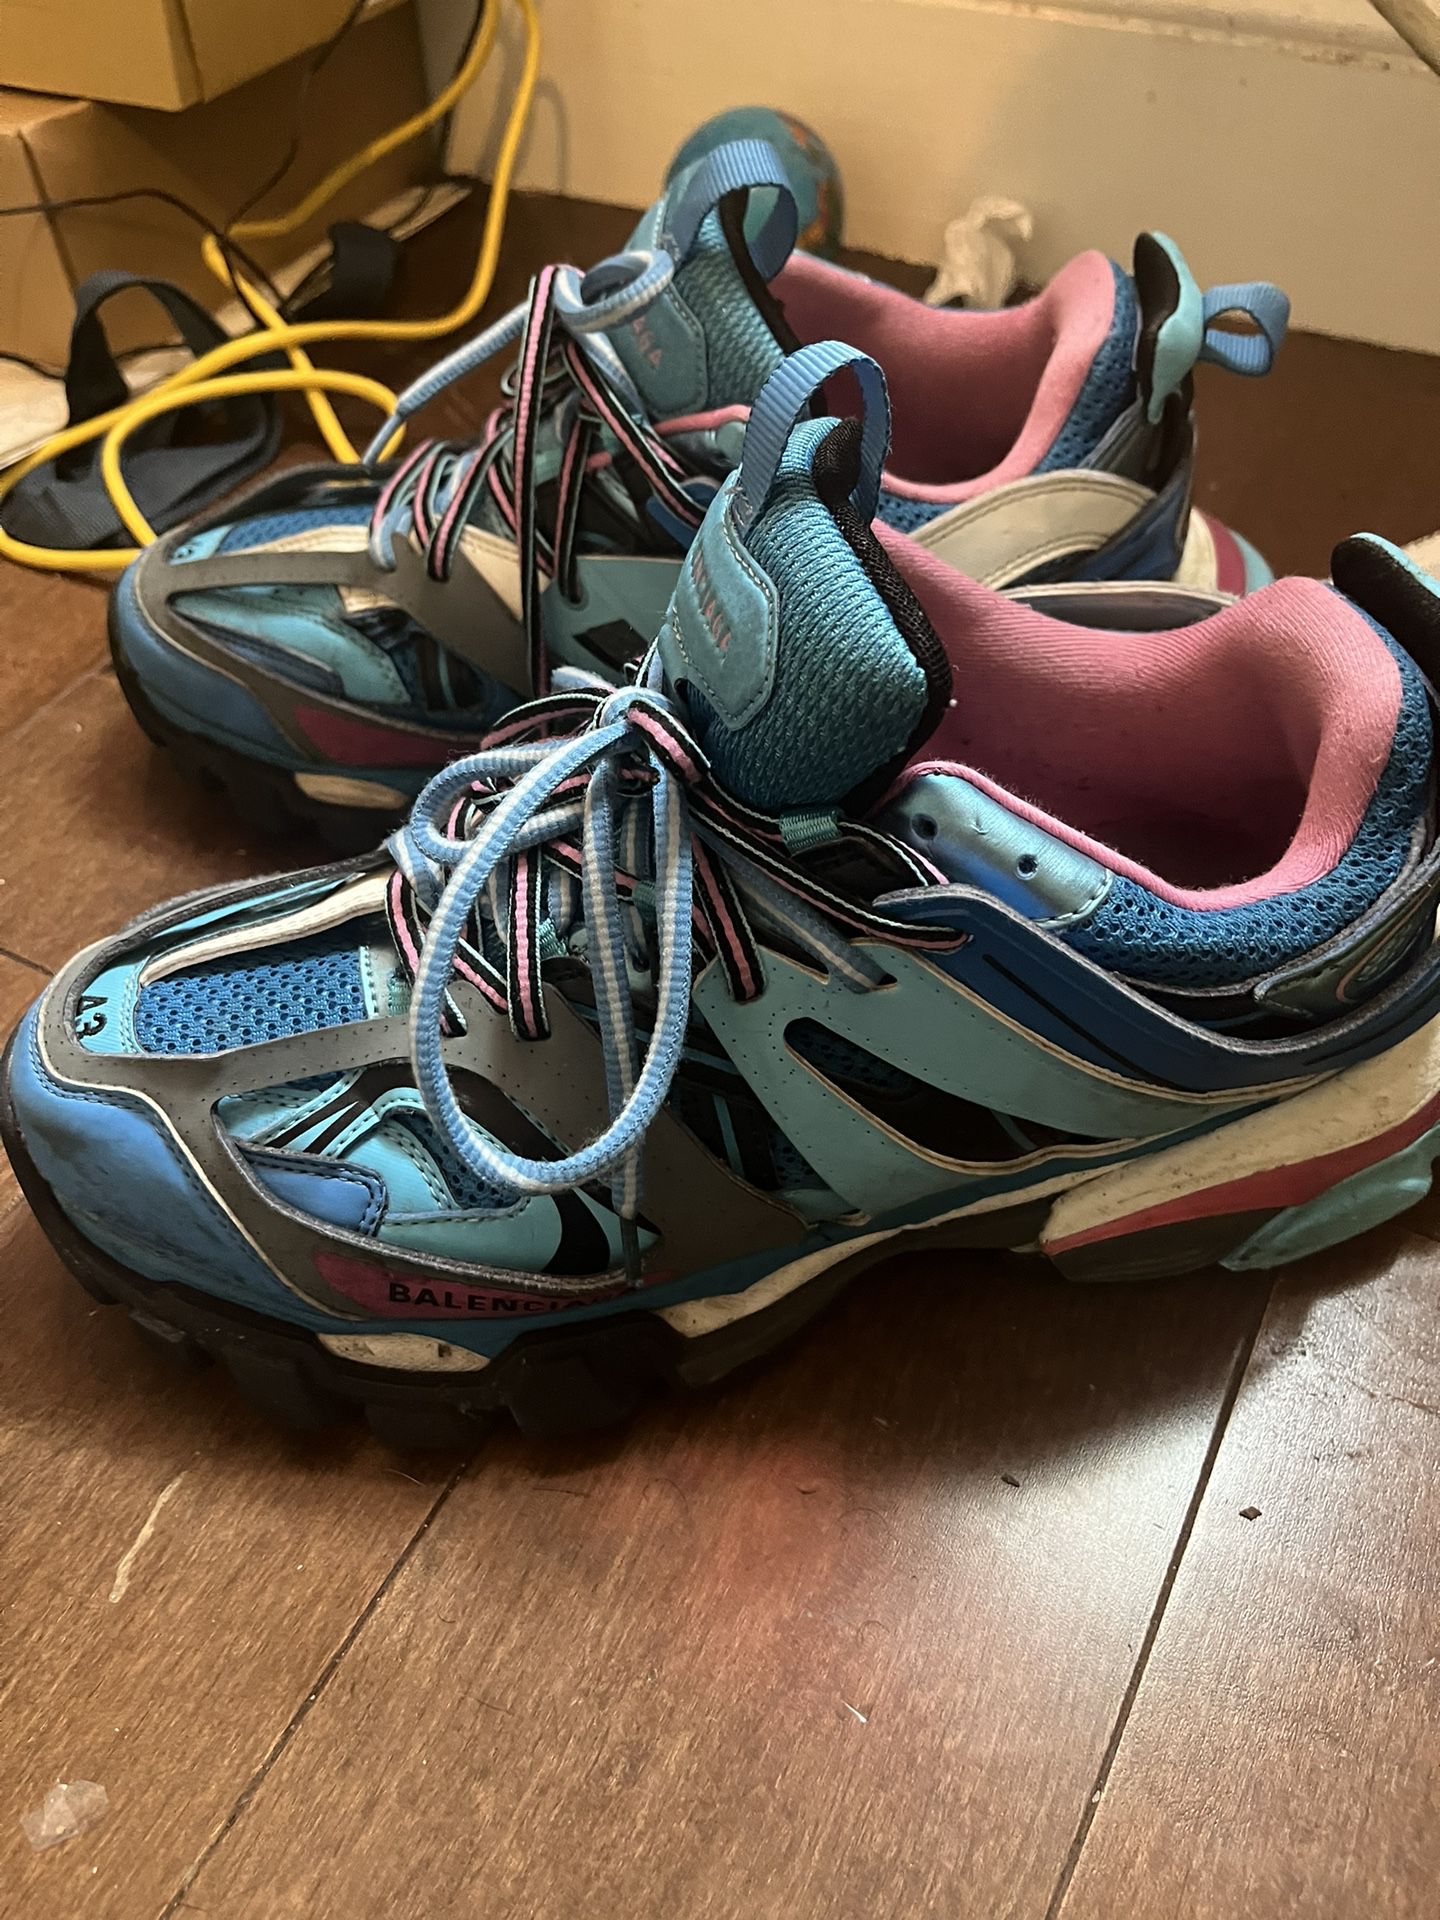 Sneakers for New York, NY - OfferUp